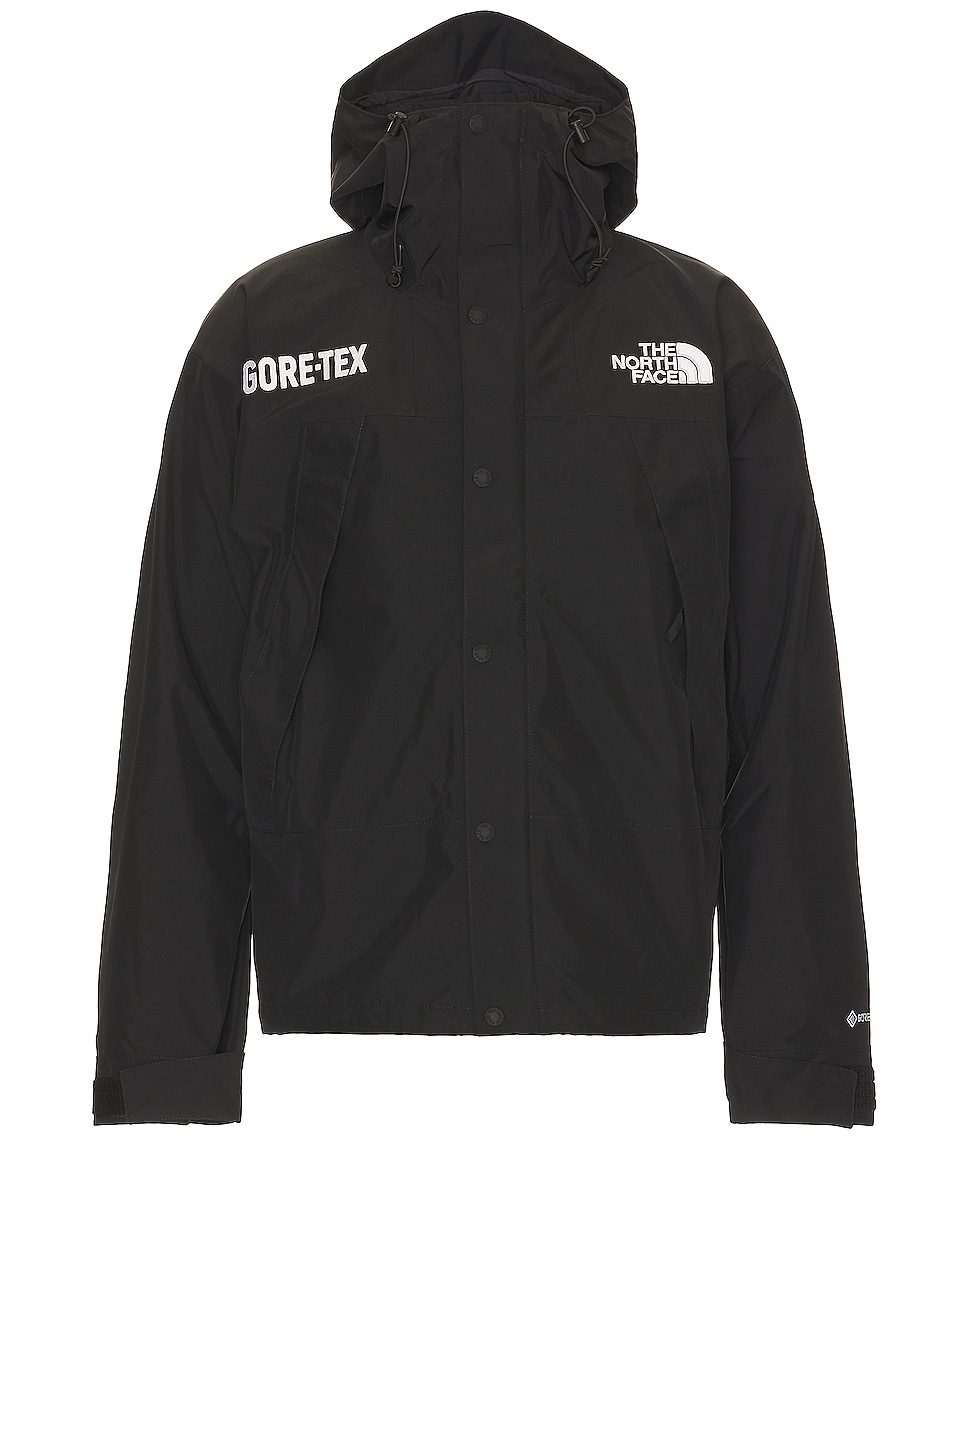 The North Face Gtx Mountain Jacket in Tnf Black | FWRD